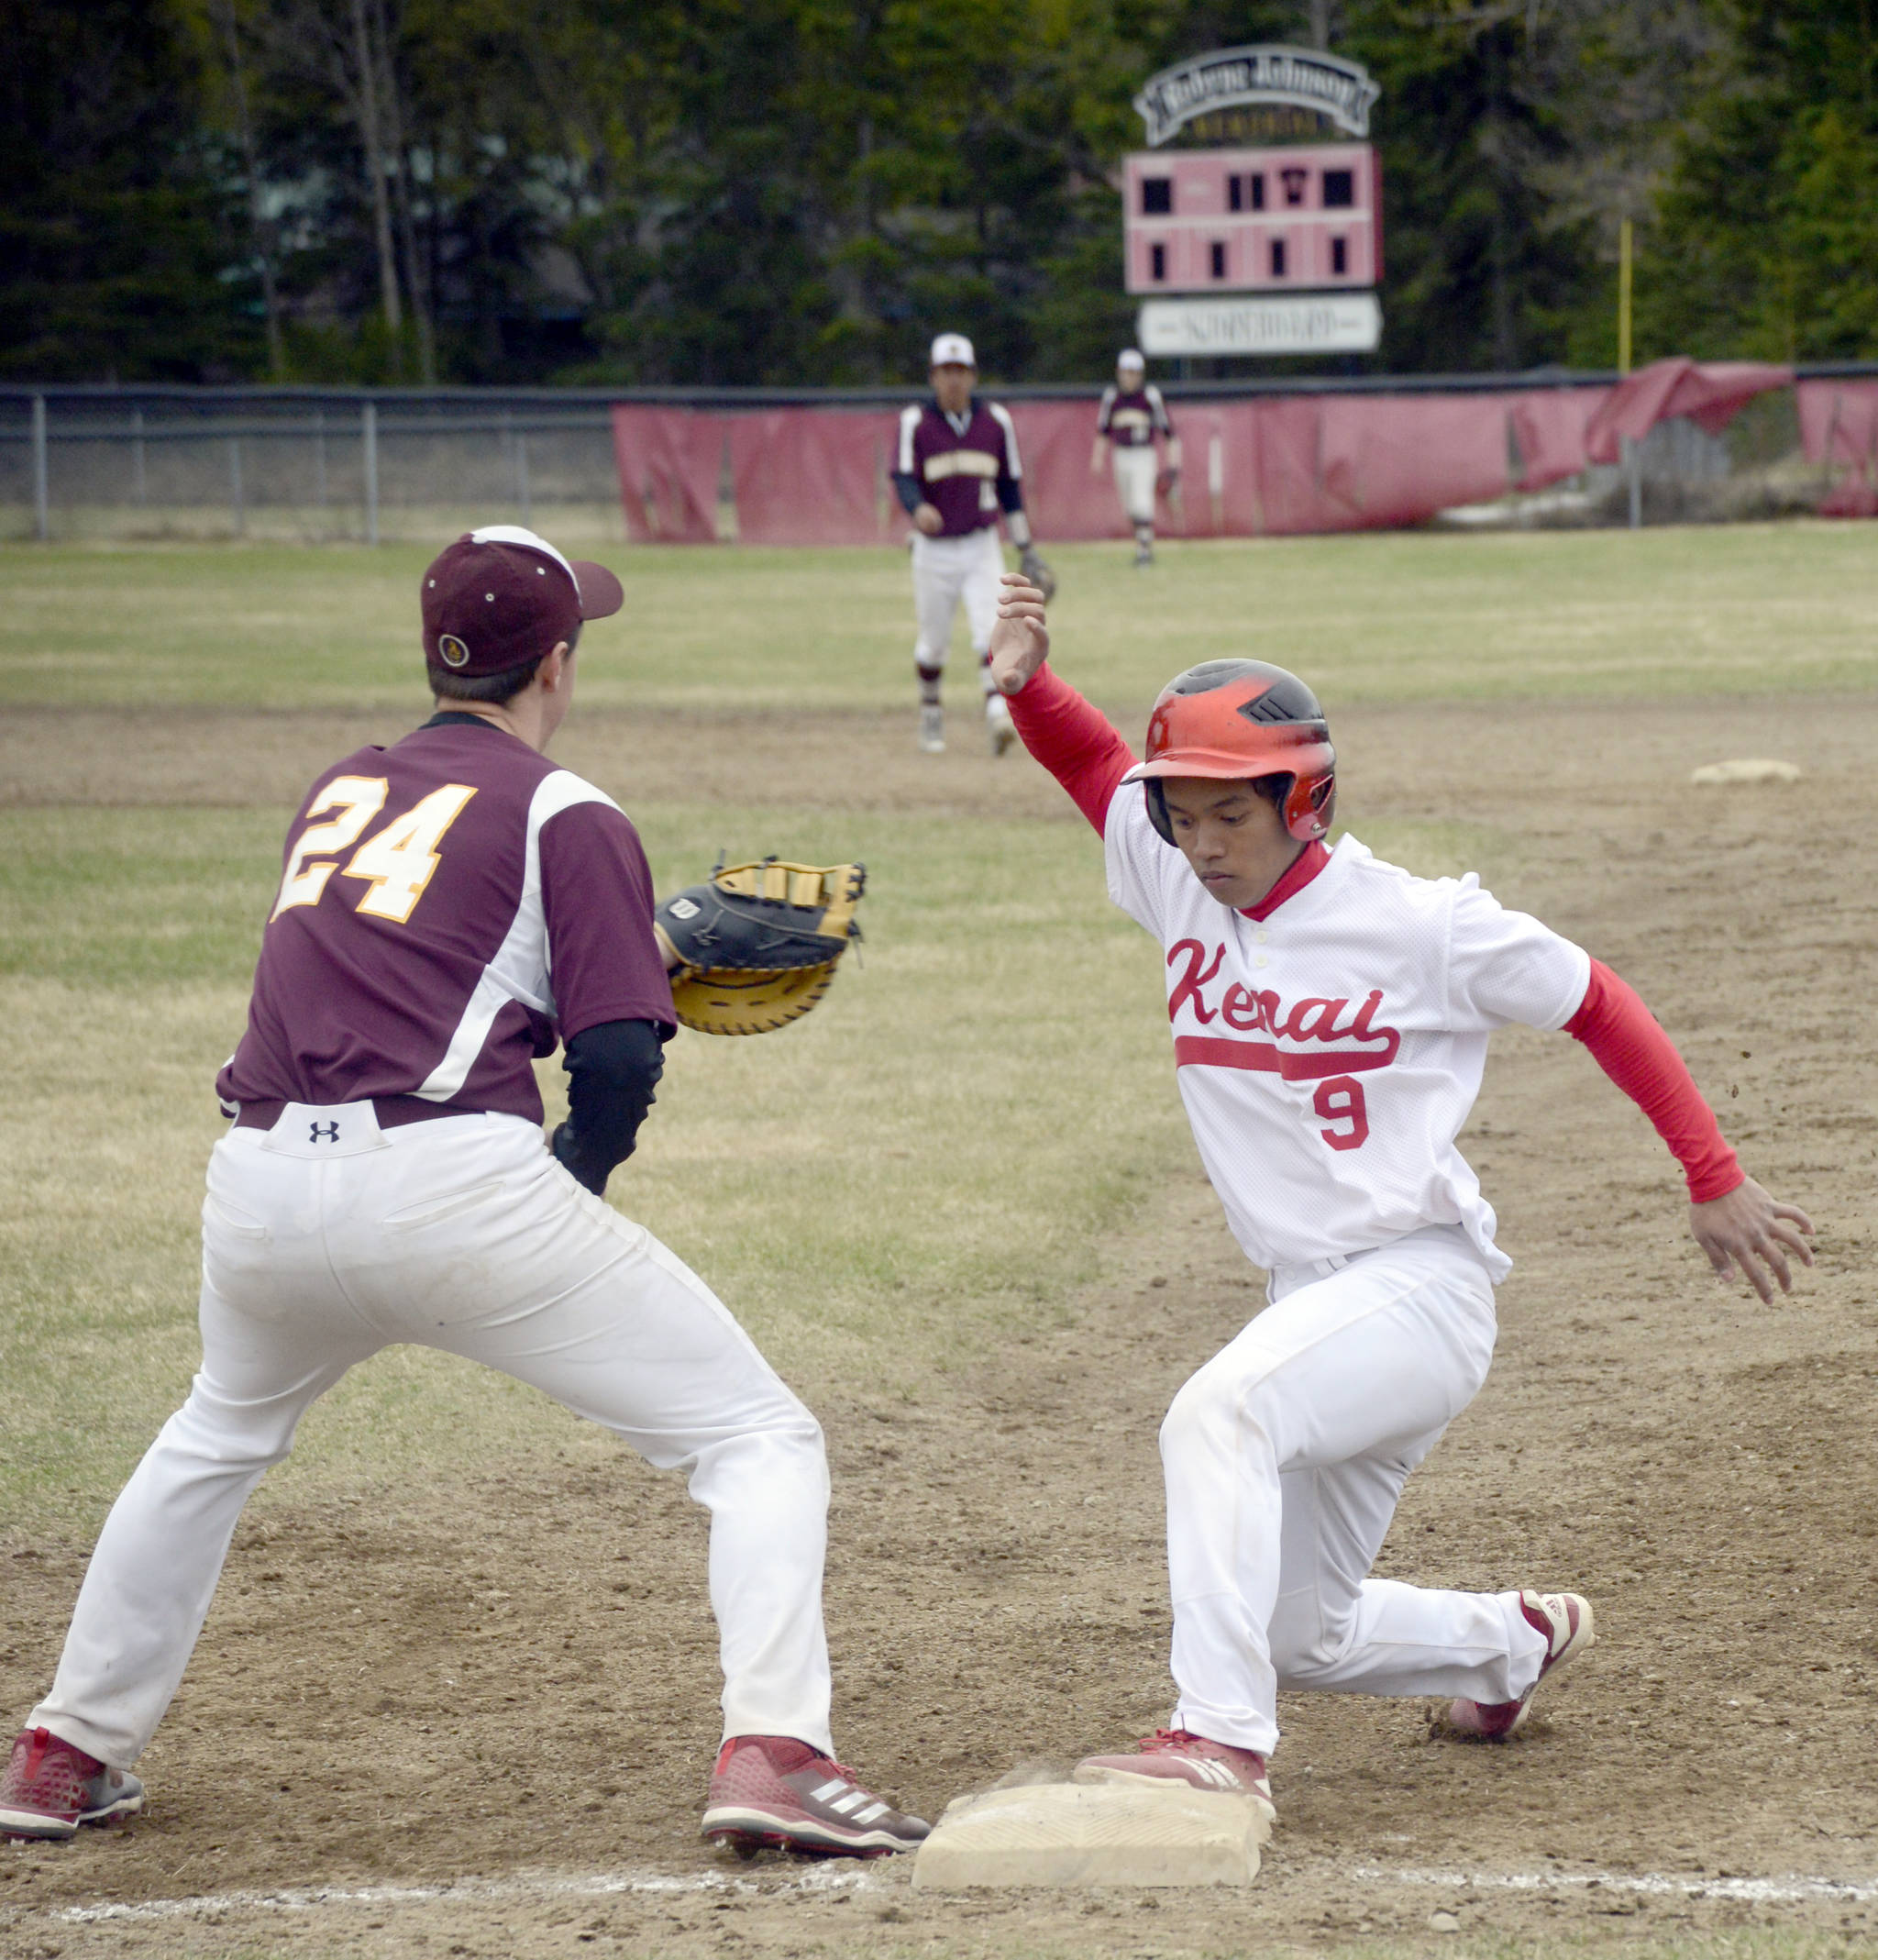 Kenai Central’s Harold Ochea gets back to first base before Grace Christian first baseman Steven Brown can apply the tag Friday, May 10, 2019, at the Kenai Little League fields in Kenai, Alaska. (Photo by Jeff Helminiak/Peninsula Clarion)